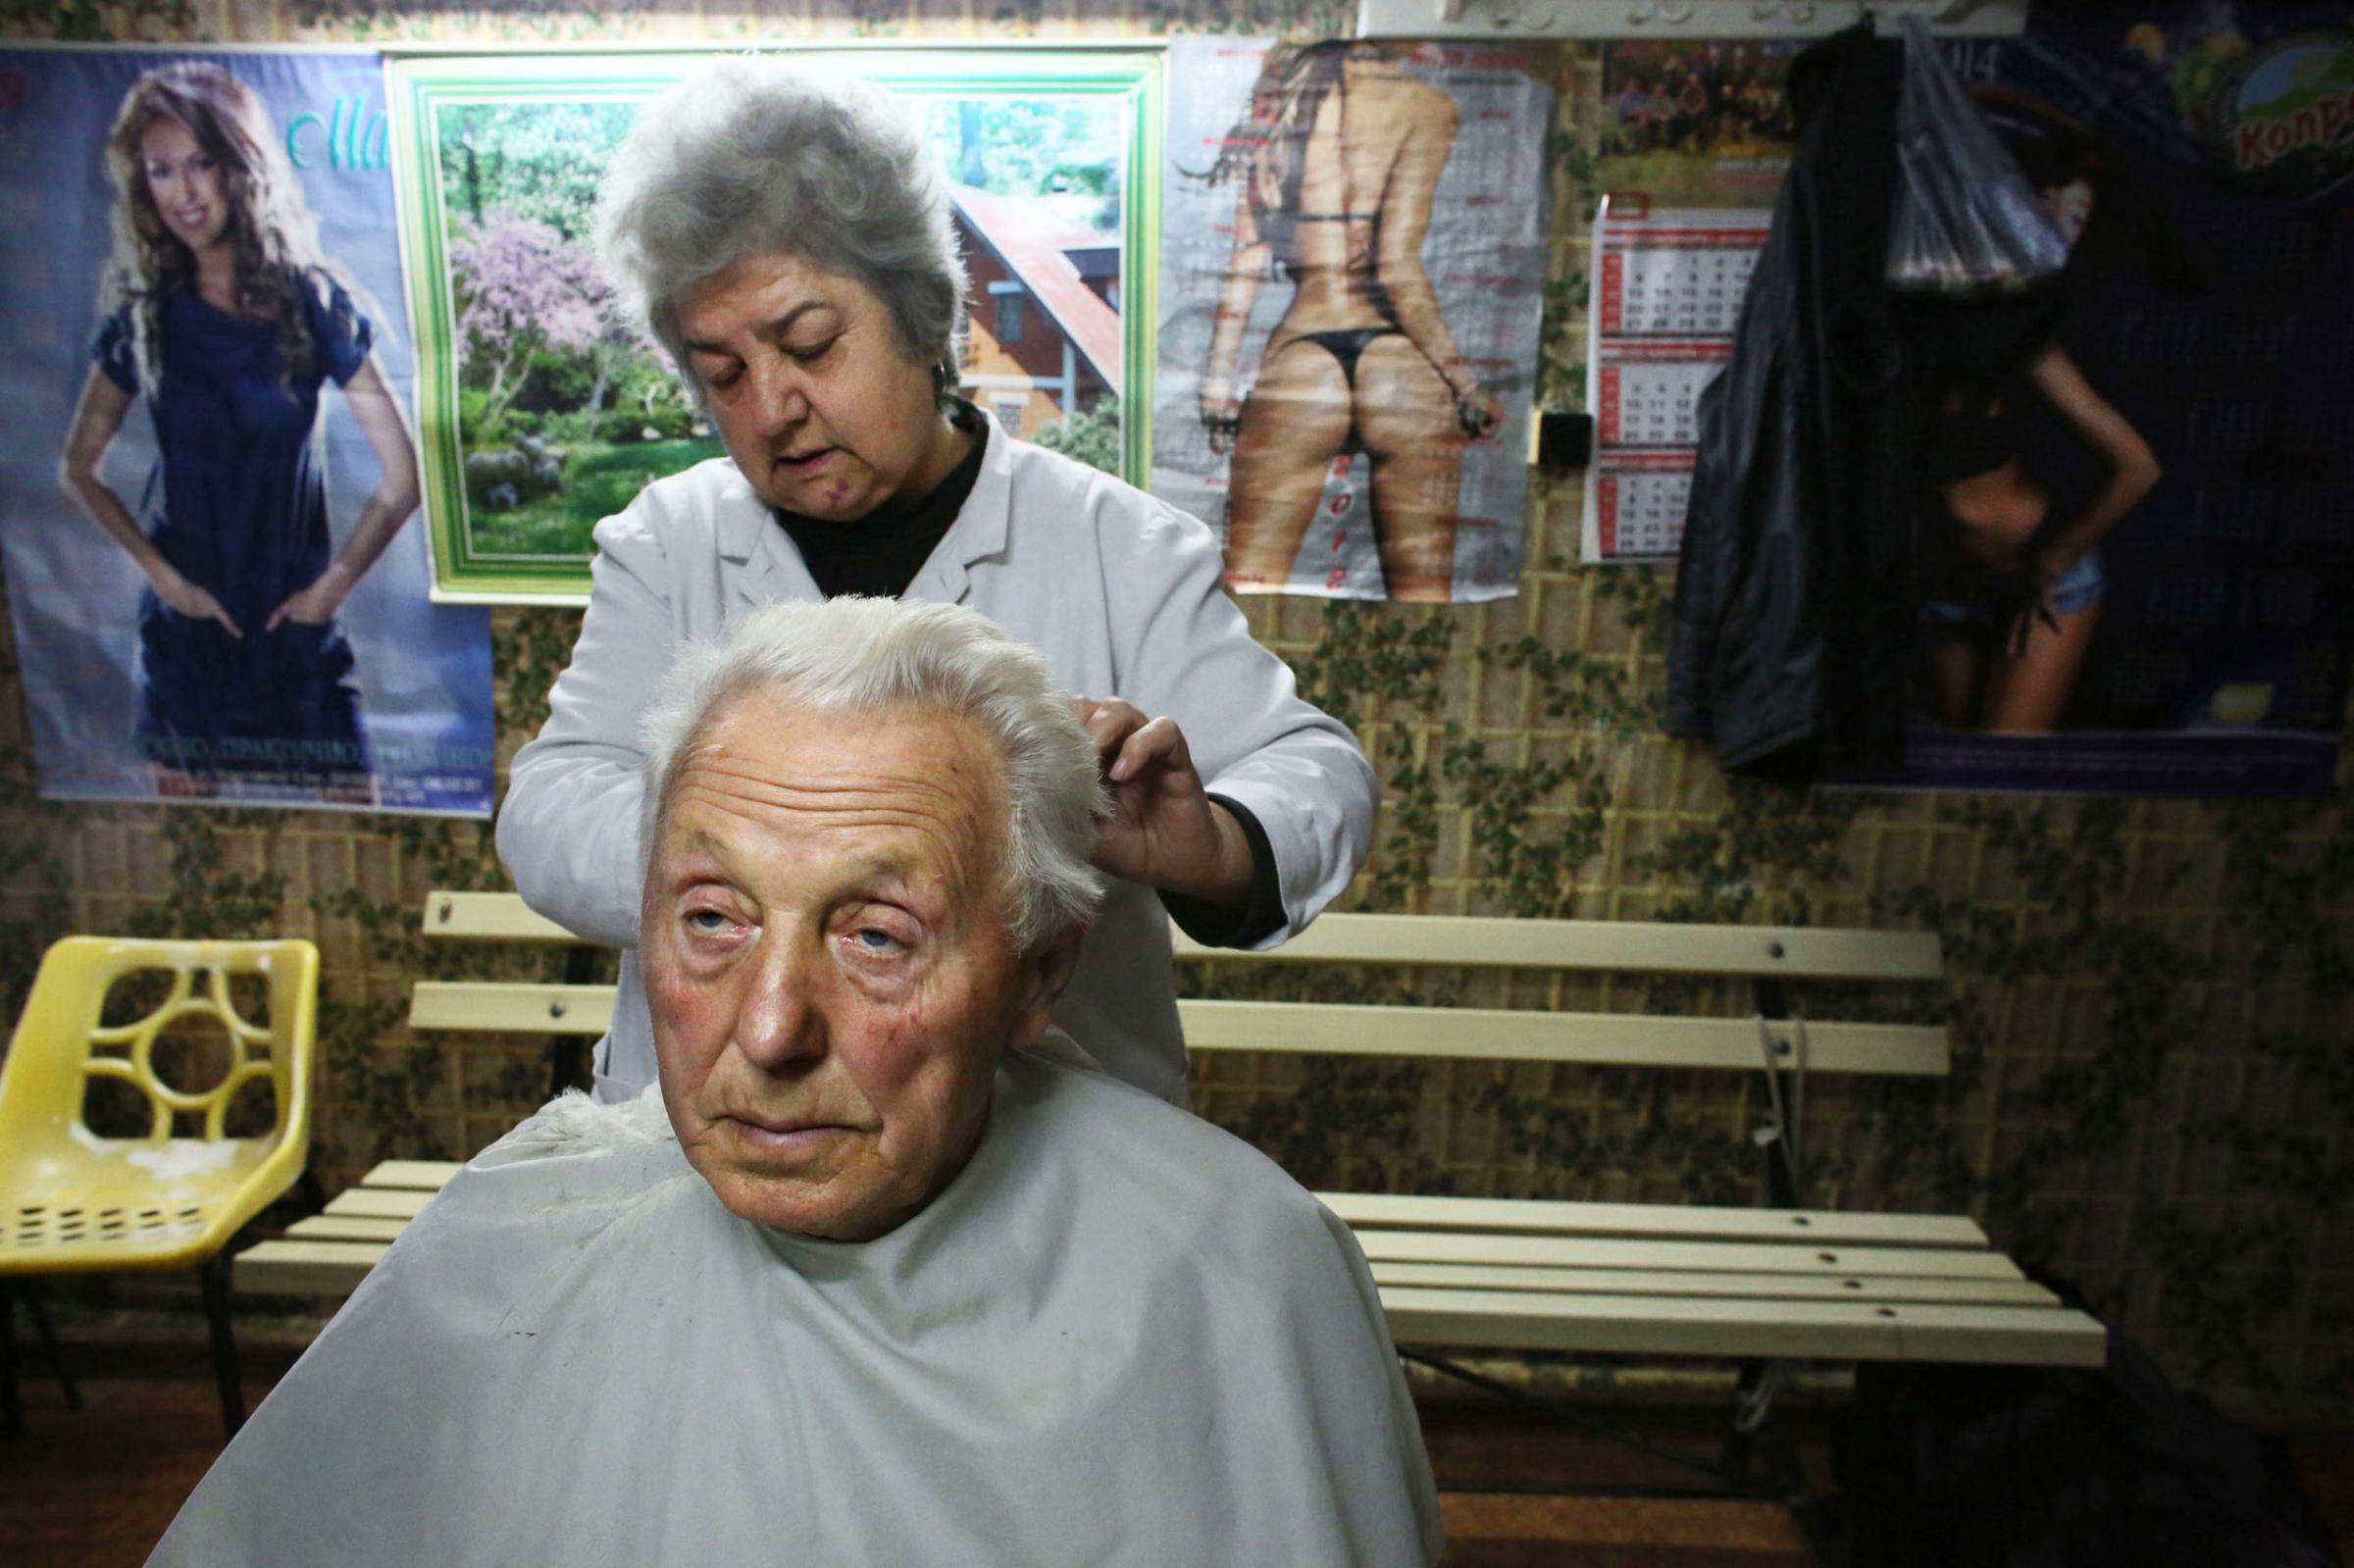 Hair dresser Pavlinka Paskova, 59, cuts the hair of Stanko Petrov Vulchev, 80, in Vidin, Bulgaria, on October 30th, 2014. Paskova says she has very few customers in this town of waning population: "There's little hope of prosperity for the young here - they've all emigrated."Bulgaria has the most extreme population decline in the world ó much due to post-1989 emigration, high death rates and low birth rates. There are so few people of child-bearing age in the nation that population statistics project a 30-percent decrease by 2060, from 7.2 million to just over 5 million. In other words,†Bulgariaís population declines by 164 people a day, or 60,000 people a year ó 60 percent of them aged over 65.This photo is from a project that aims to gauge the state and effect of democracy in the former Soviet satellite nation Bulgaria, two and a half decades after the fall of the Berlin Wall. The story of democracy in Bulgaria at age 25 is a cautionary tale about transplanting one-size-fits-all Western values to a nation still undergoing social and economic upheaval. Bulgaria is still one of the poorest, most corrupt nations in the European Union, its post-1989 hopes wilted by political instability, high crime rates and skyrocketing inflation. While Bulgarians can now freely vote and protest without much threat to their freedom, their new oppressor is corruption - which is at a 15 year high, across political and civil sectors alike. The ennui is so casually etched on the passerby's face that it becomes routine - one that fits in sadly well against a startling backdrop of rotting architecture, joblessness, and a vast population decline. Despite what democracy has changed in Bulgaria, the daily struggles of its populace remain largely untouched, trapped in a post-communist time capsule.This project was supported by a grant from The Pulitzer Center on Crisis Reporting. Photo by: Yana PaskovaCopyright © Yana Paskova 2014